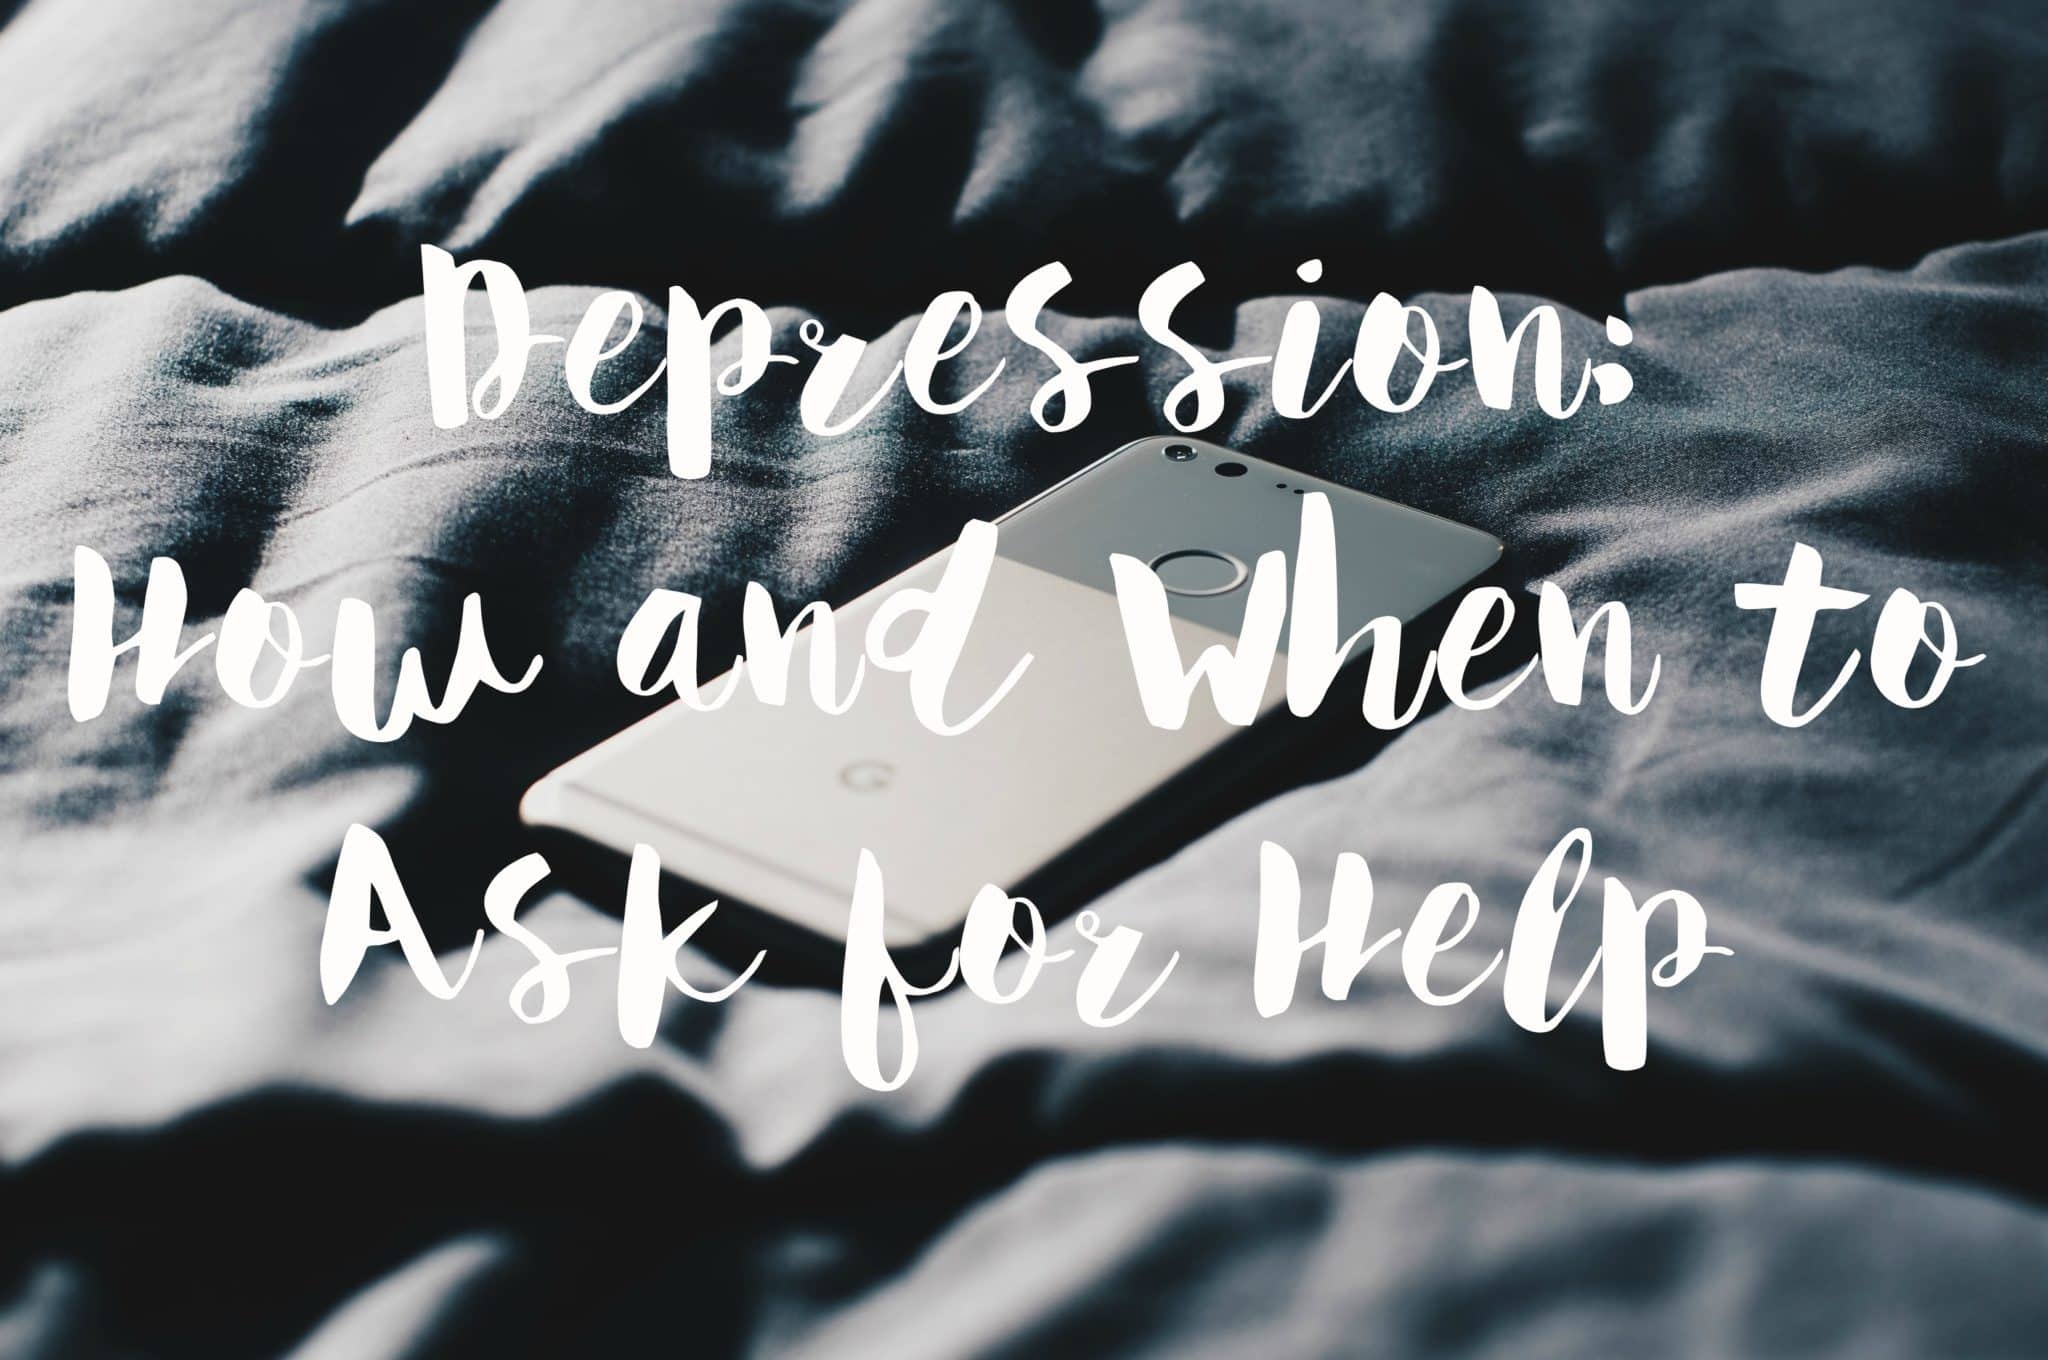 Depression: How And When To Ask For Help